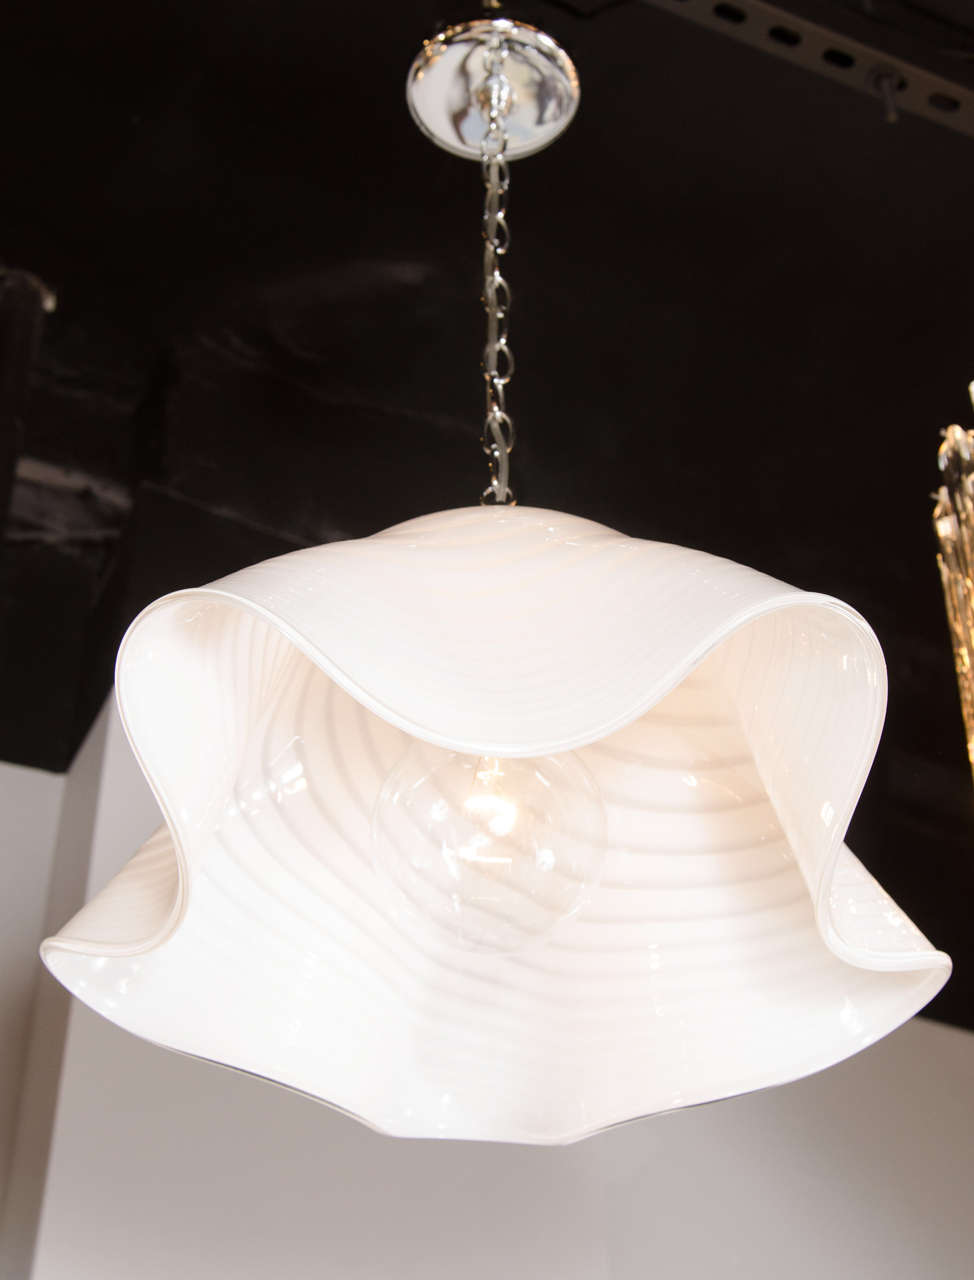 Mid-20th Century Mid-Century Modernist Murano Glass Handkerchief Chandelier with Chrome Fittings